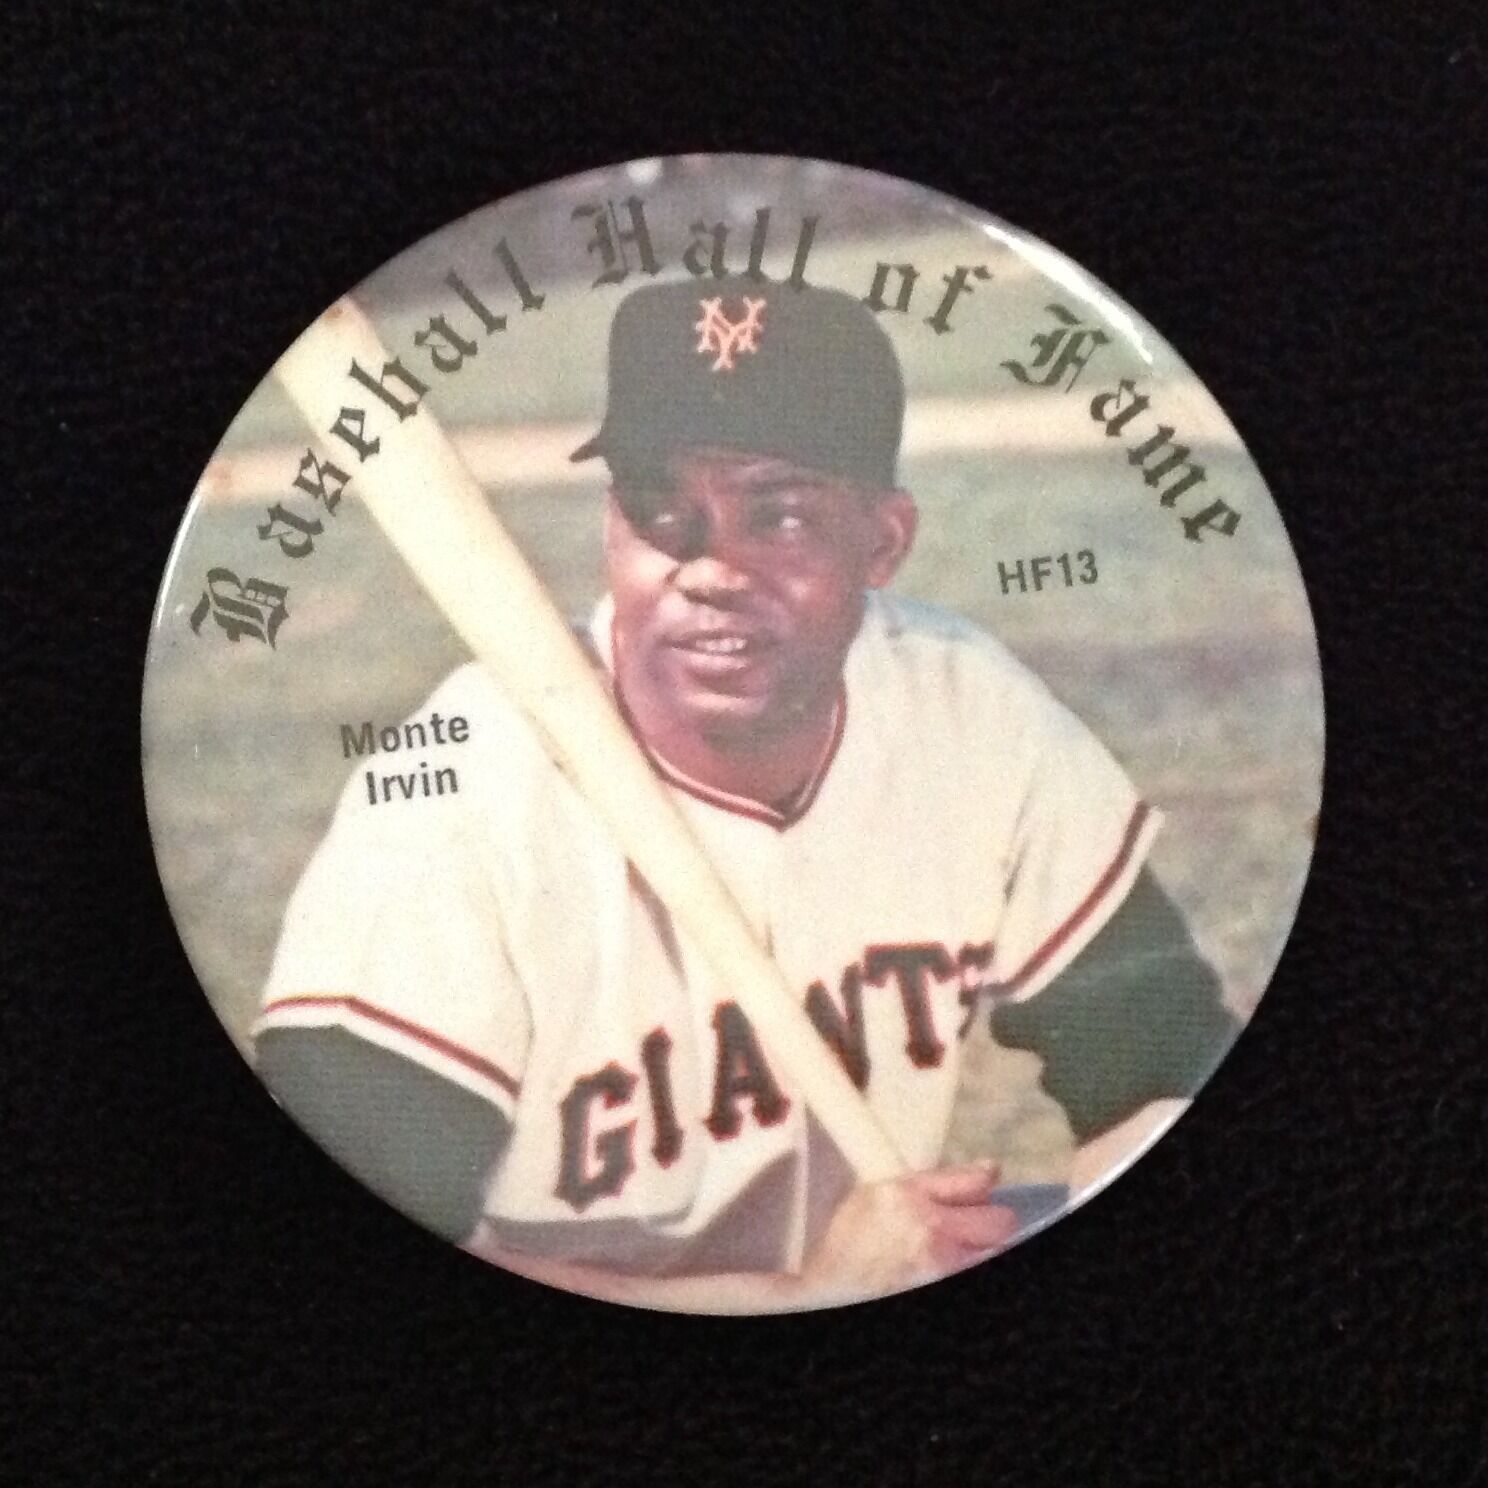 Monte Irvin Baseball Hall of Fame Giants Pin Button 1978 Sports Photo Poster painting Assoc.